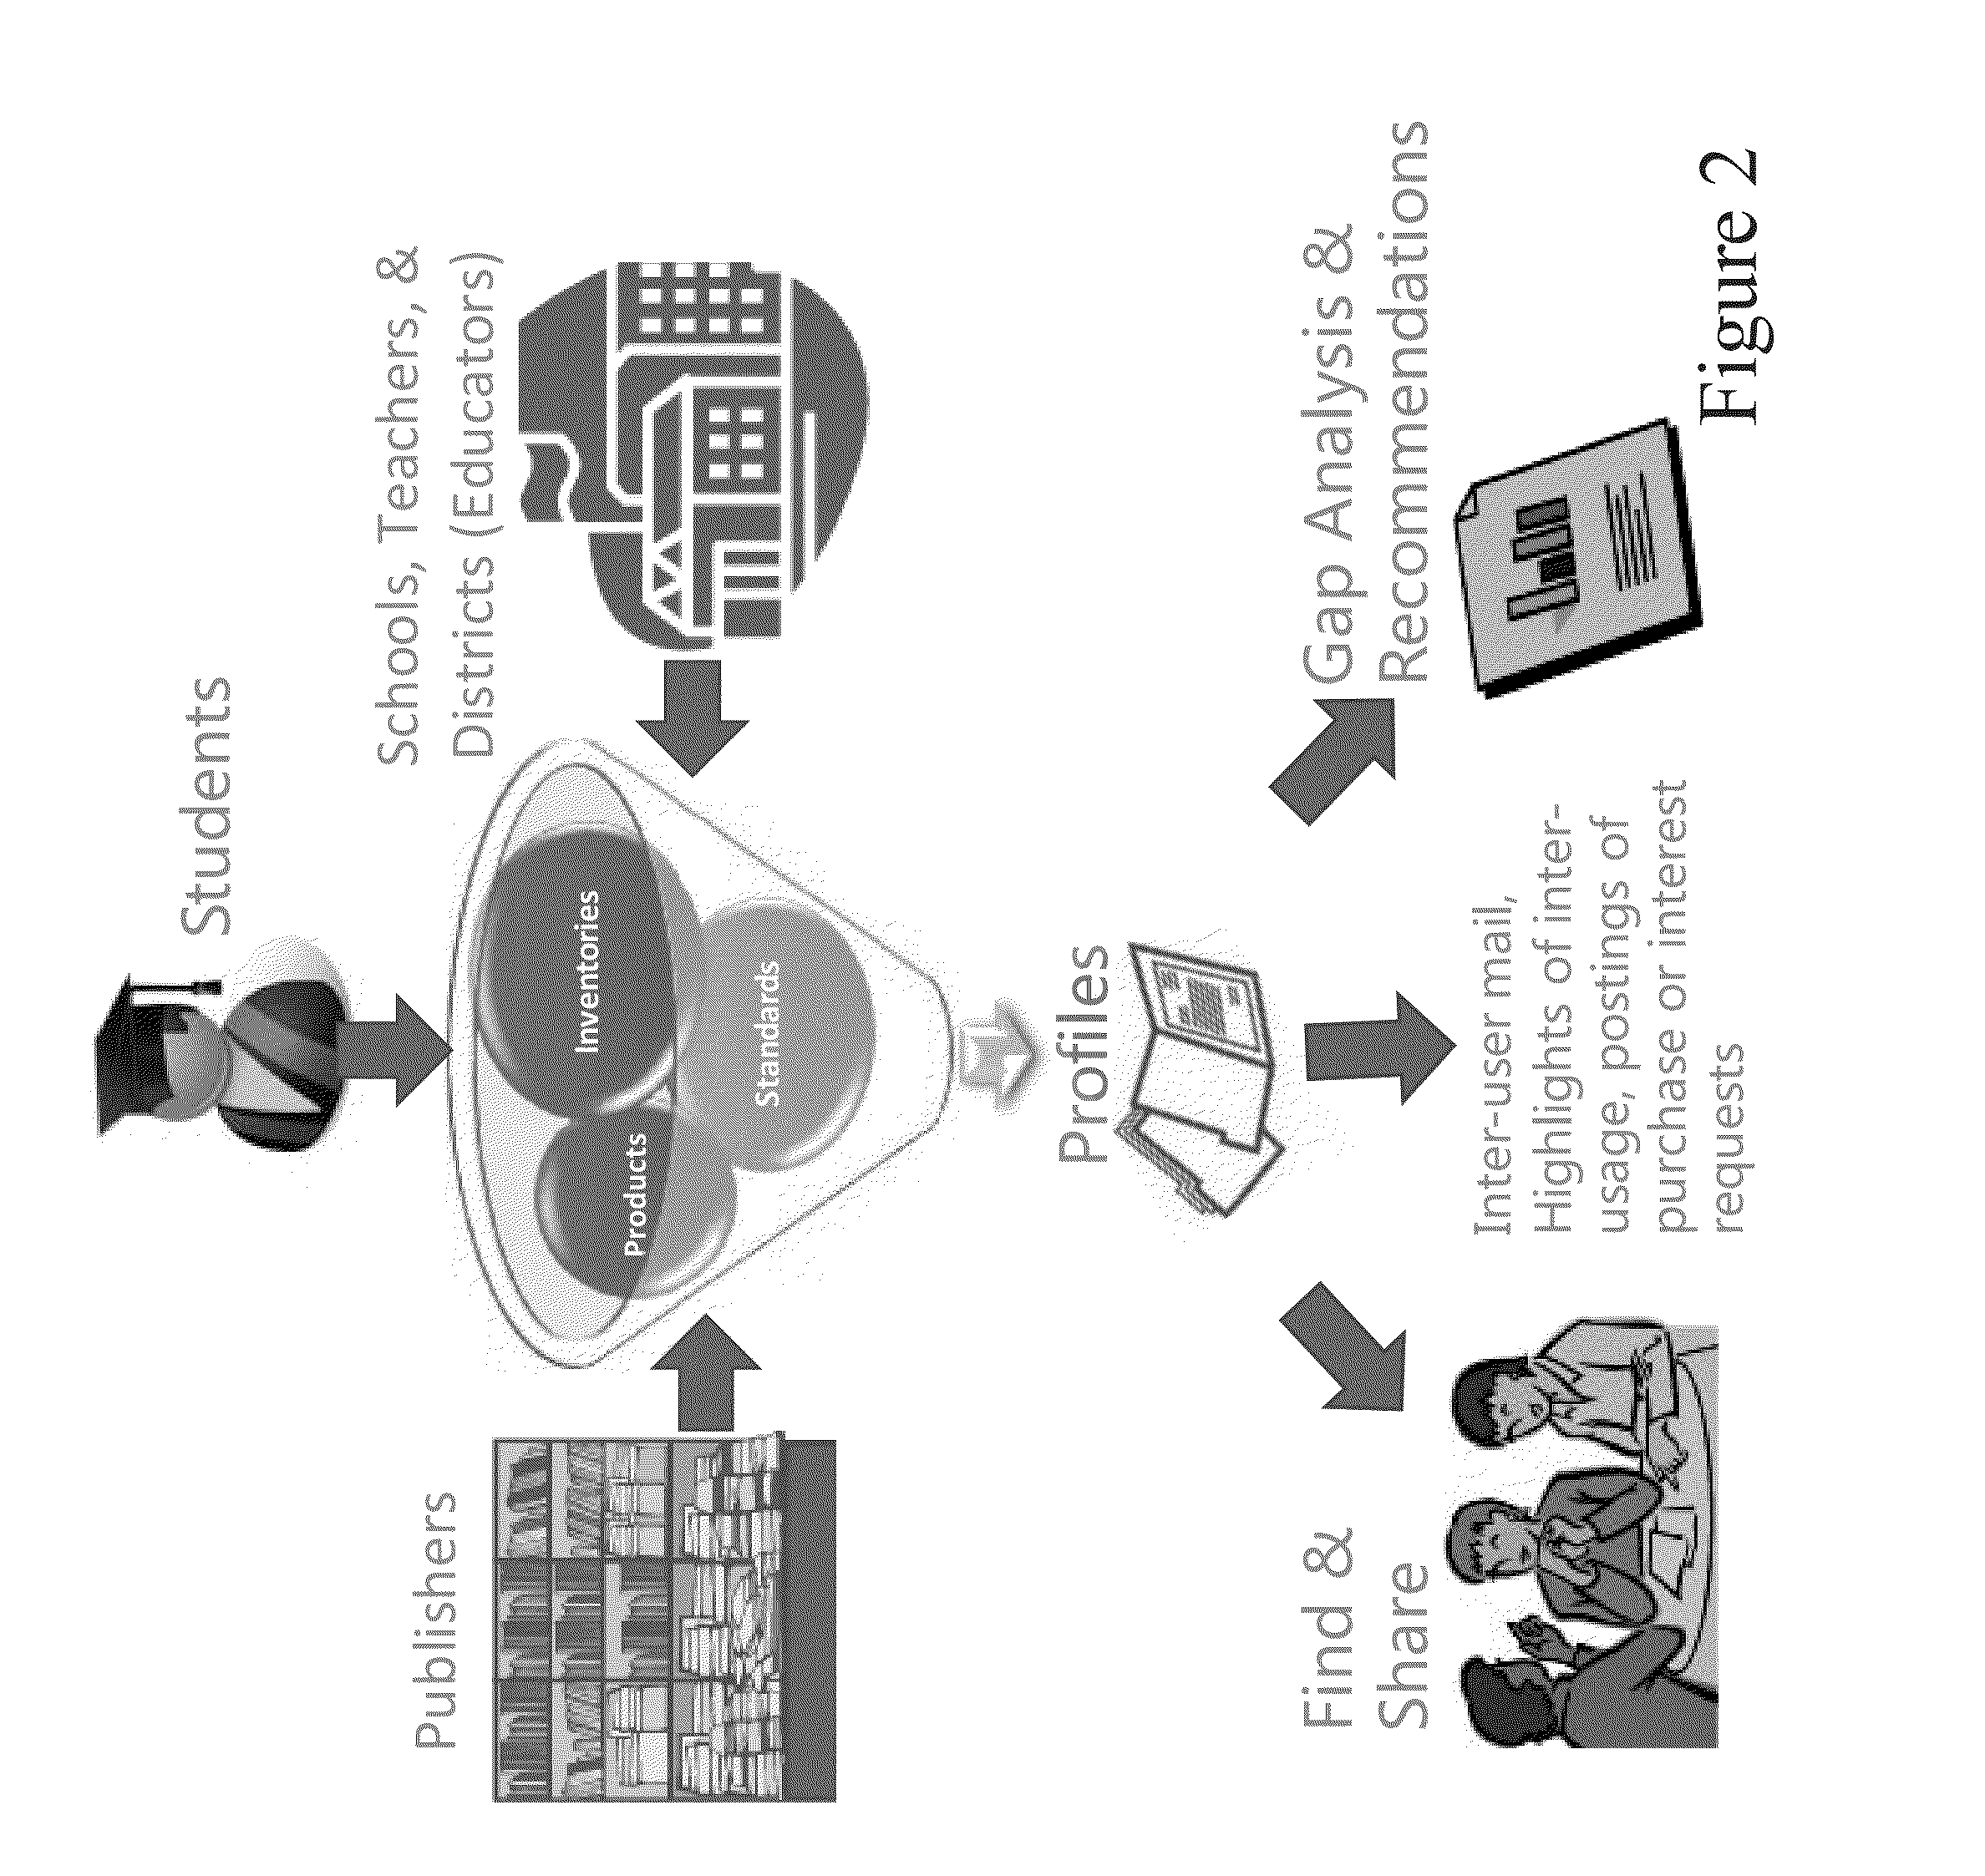 System and method for providing an information platform with credentials validation